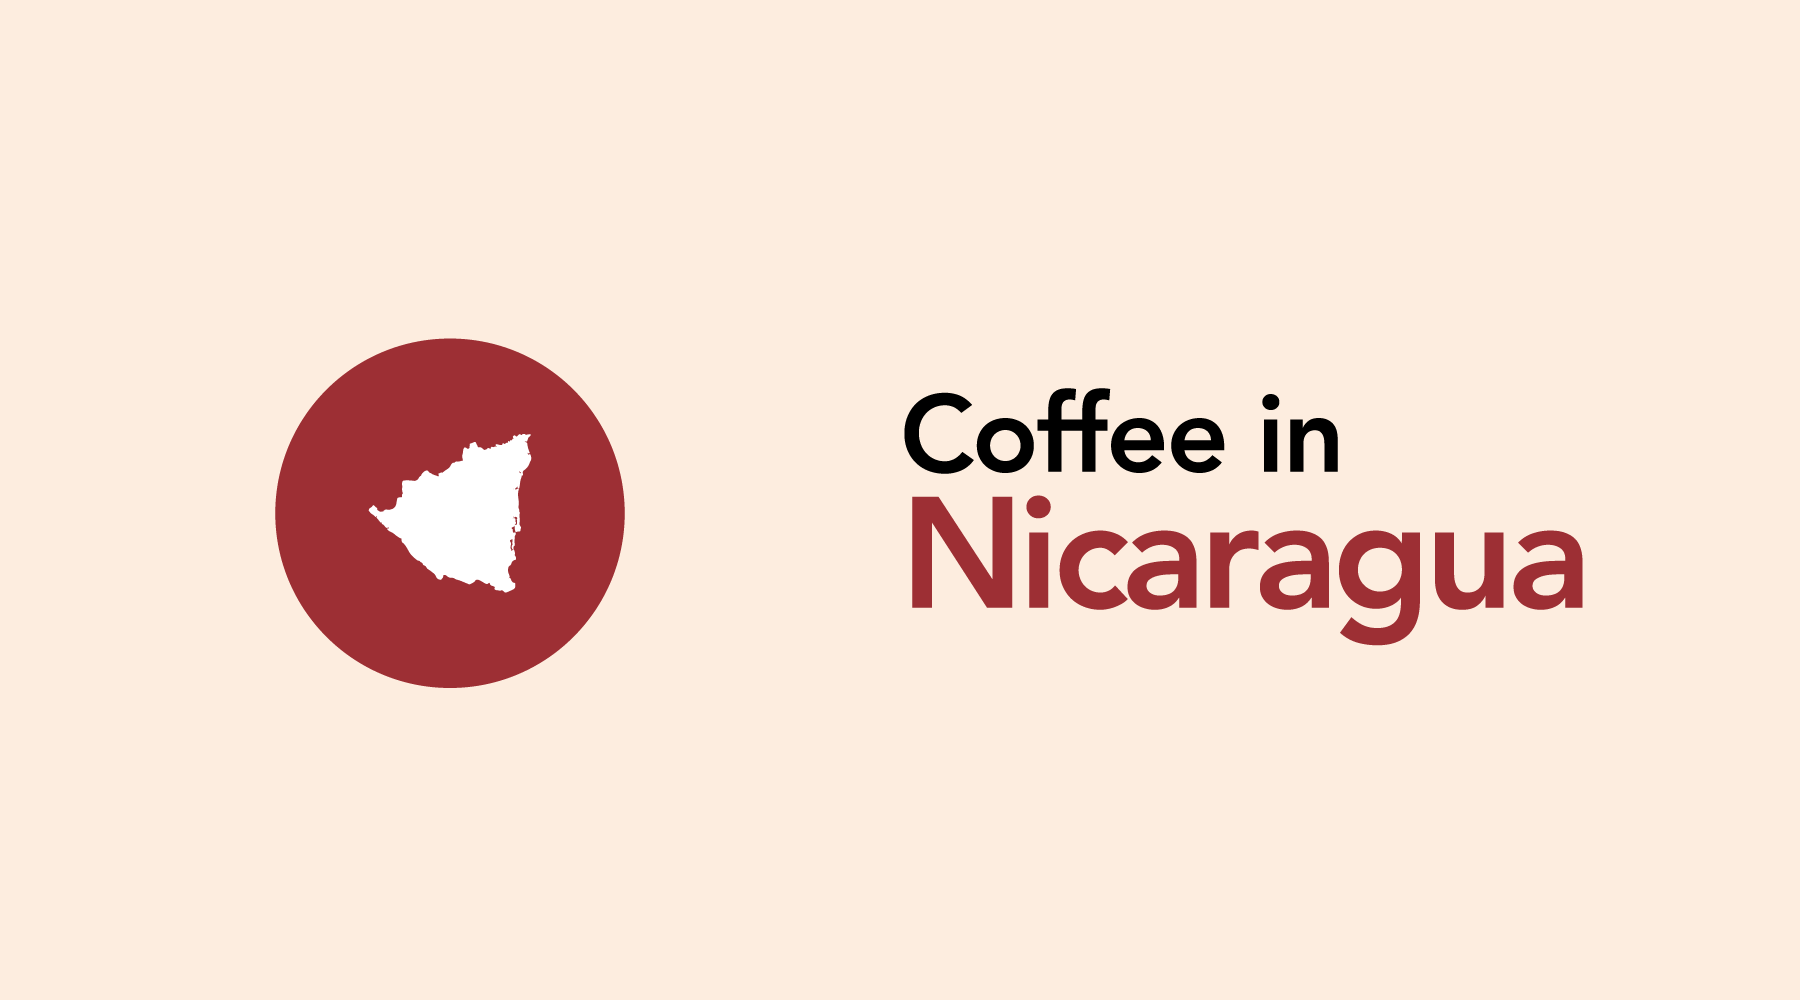 Nicaragua | A Wide Variety of Coffee with a Challenging History